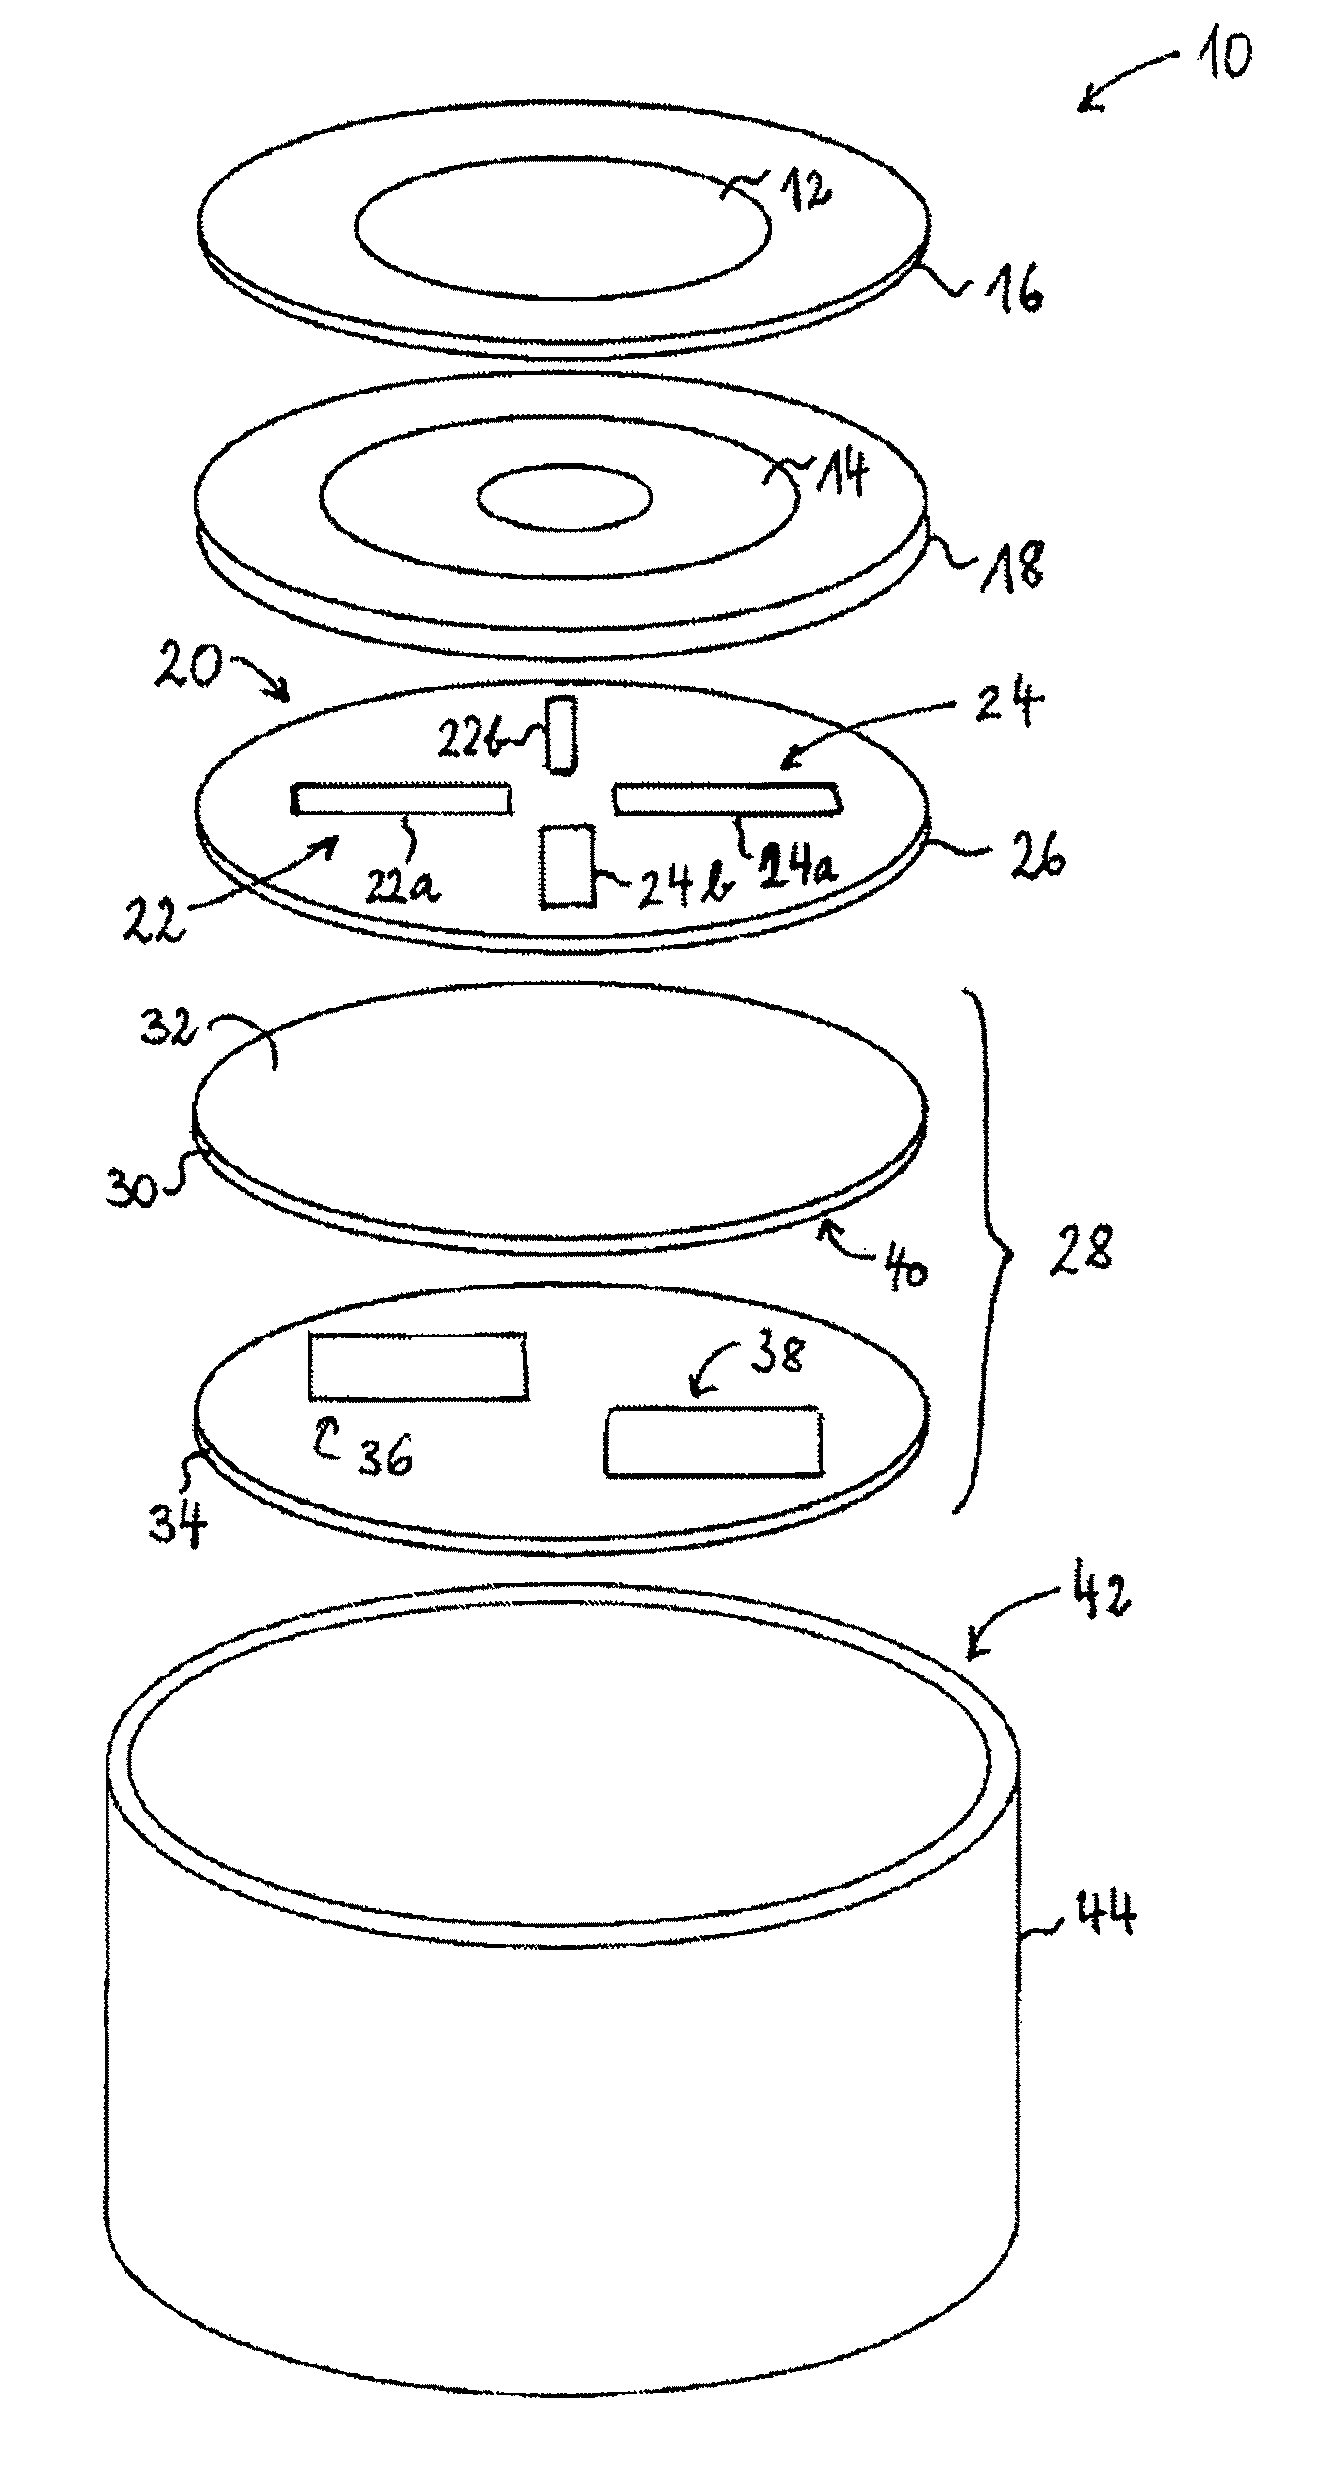 Multi-band antenna for satellite positioning system